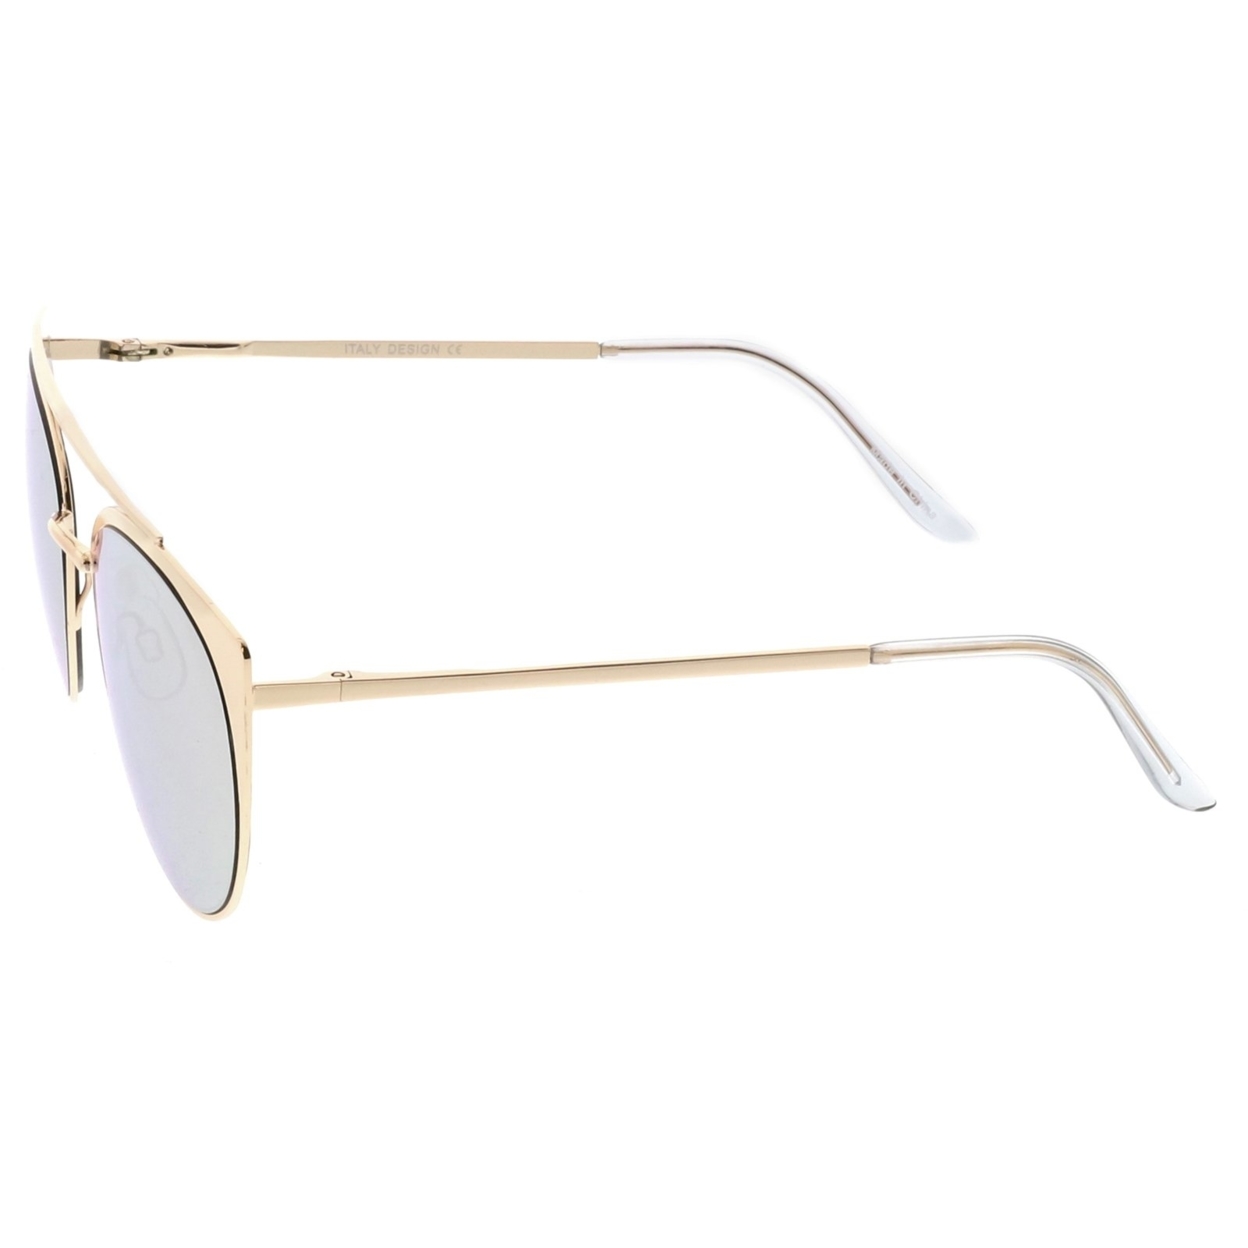 Premium Oversize Metal Cat Eye Sunglasses With Crossbar And Colored Mirror Flat Lens 58mm - Gold / Orange Mirror